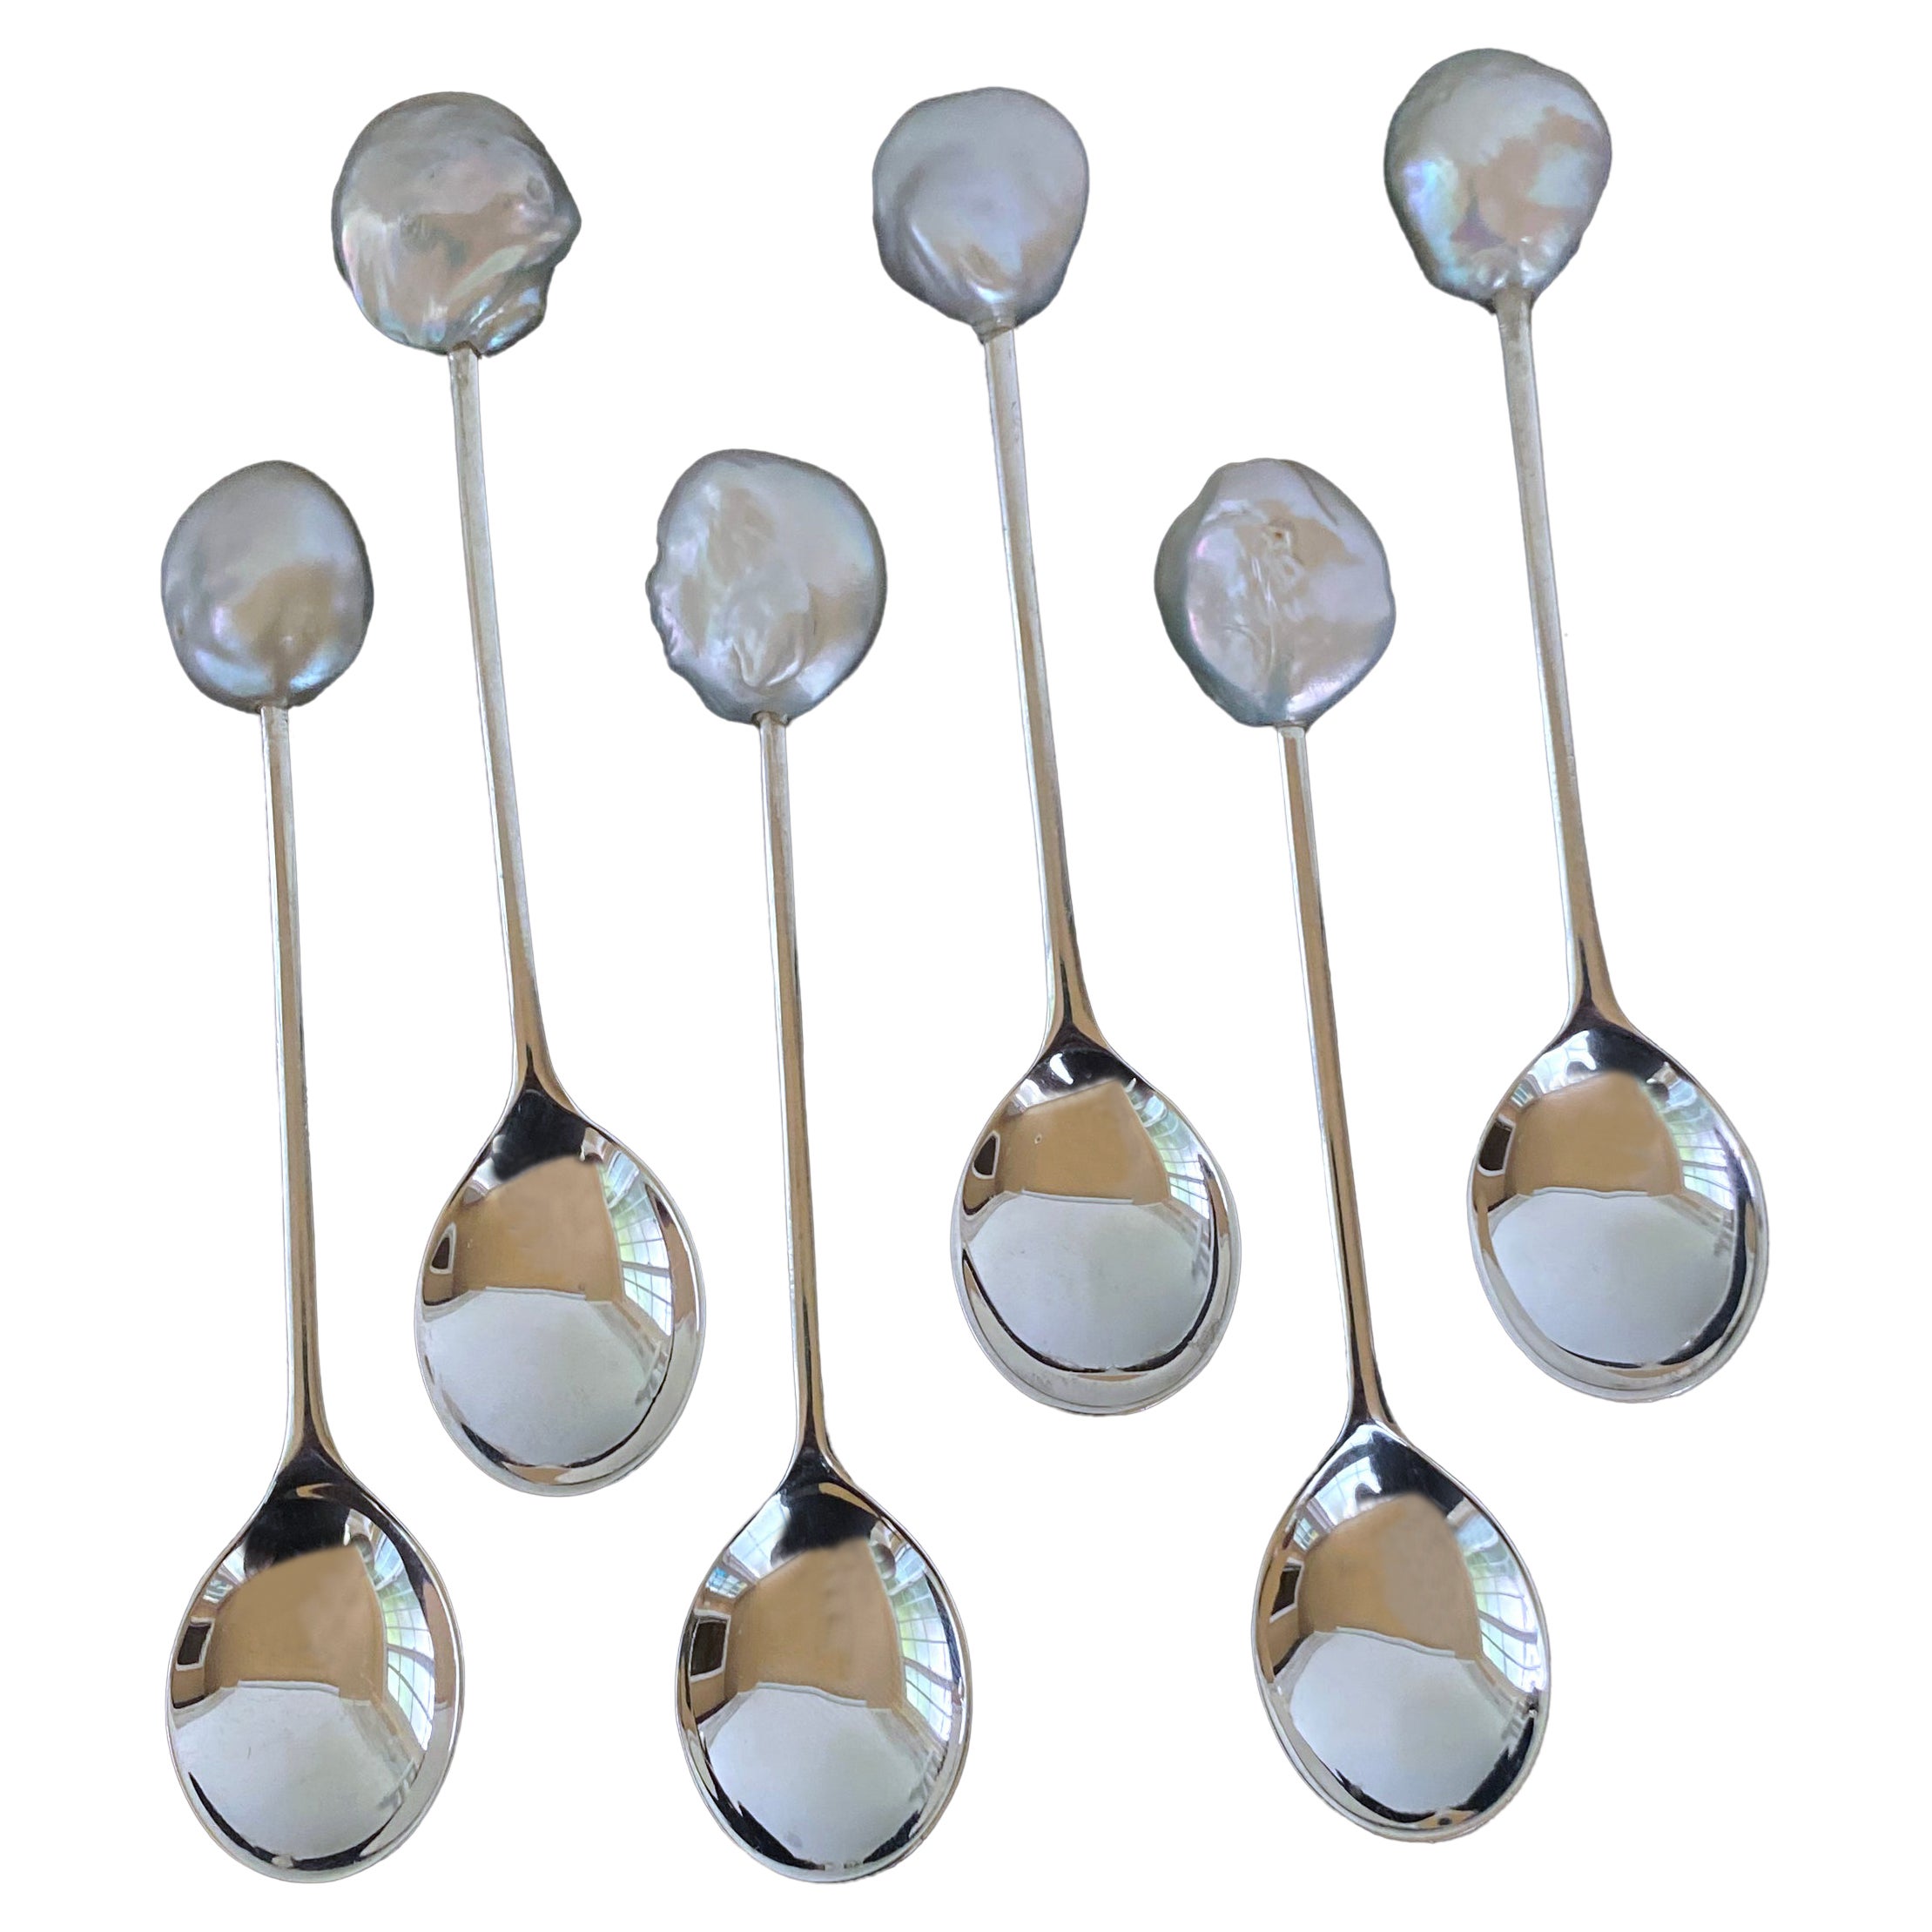 Marina J. Mothers Day Gift, Vintage Silver Plated Spoon Set with Baroque Pearls For Sale